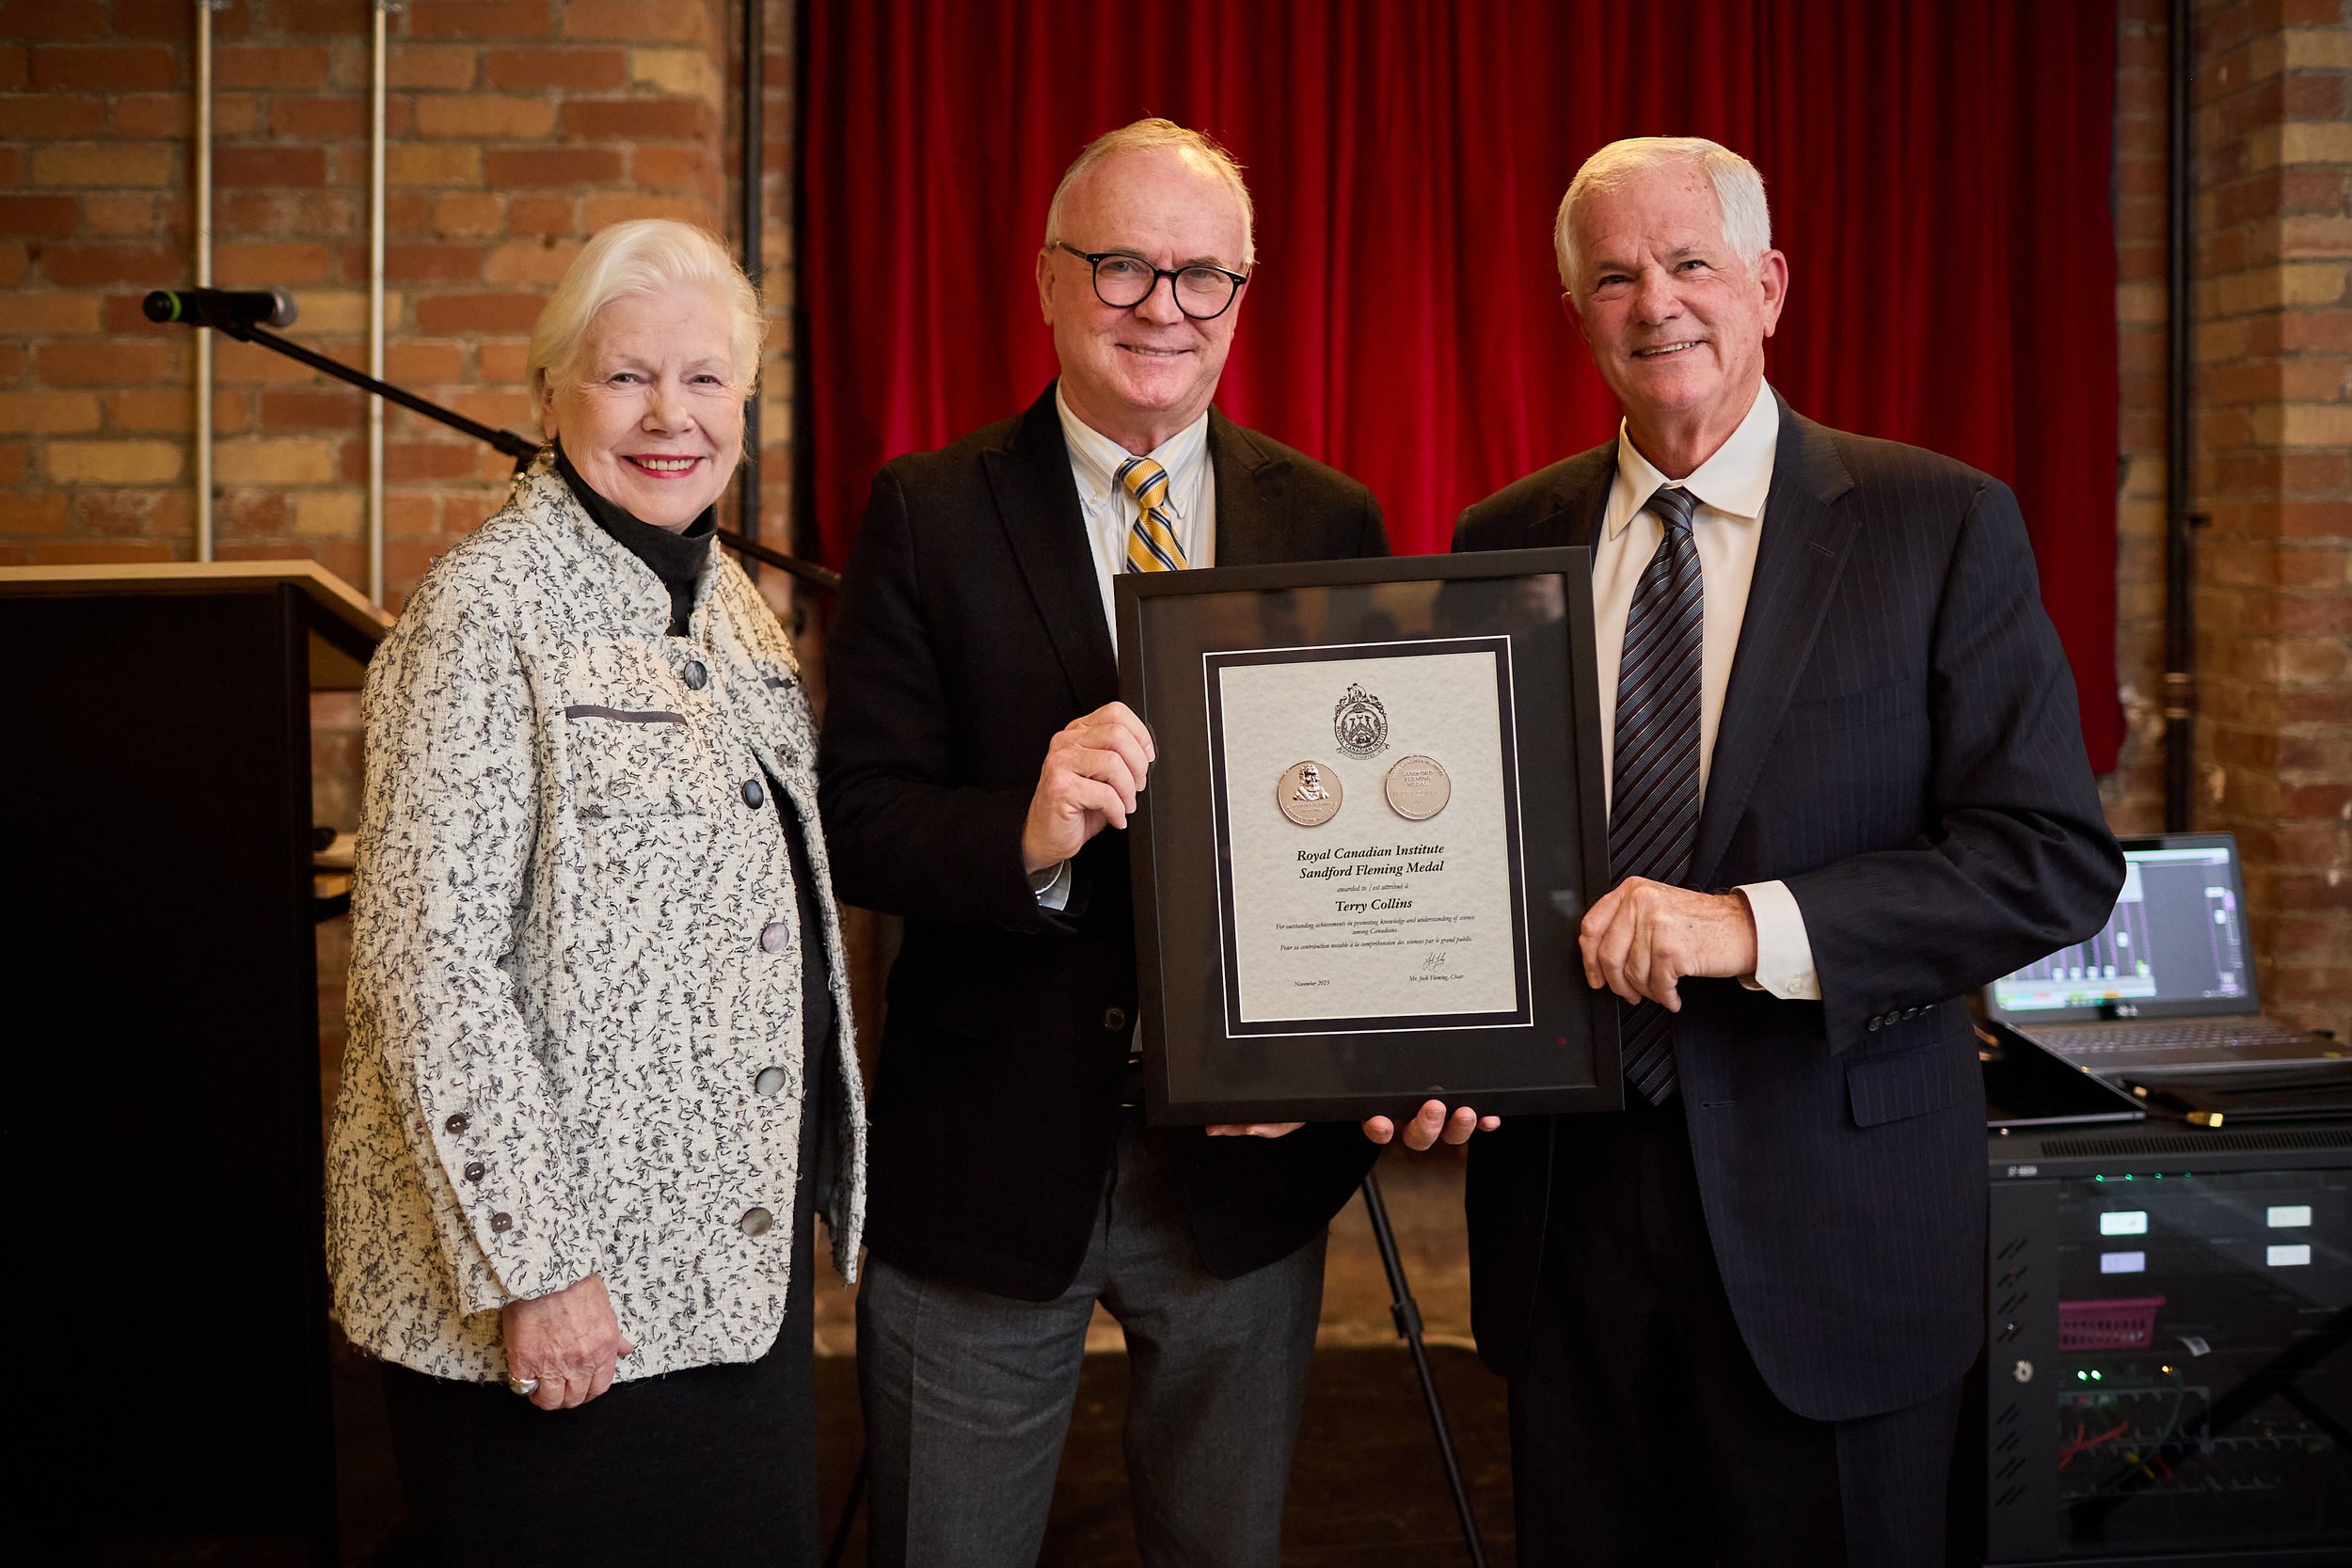  Science writer Terry Collins receives the 2023 Sandford Fleming Medal from Jock Fleming (descendent of RCIScience founder Sir Sandford Fleming for whom the award is named) and The Honourable Elizabeth Dowdeswell, OC OOnt, the 29th Lieutenant Governo